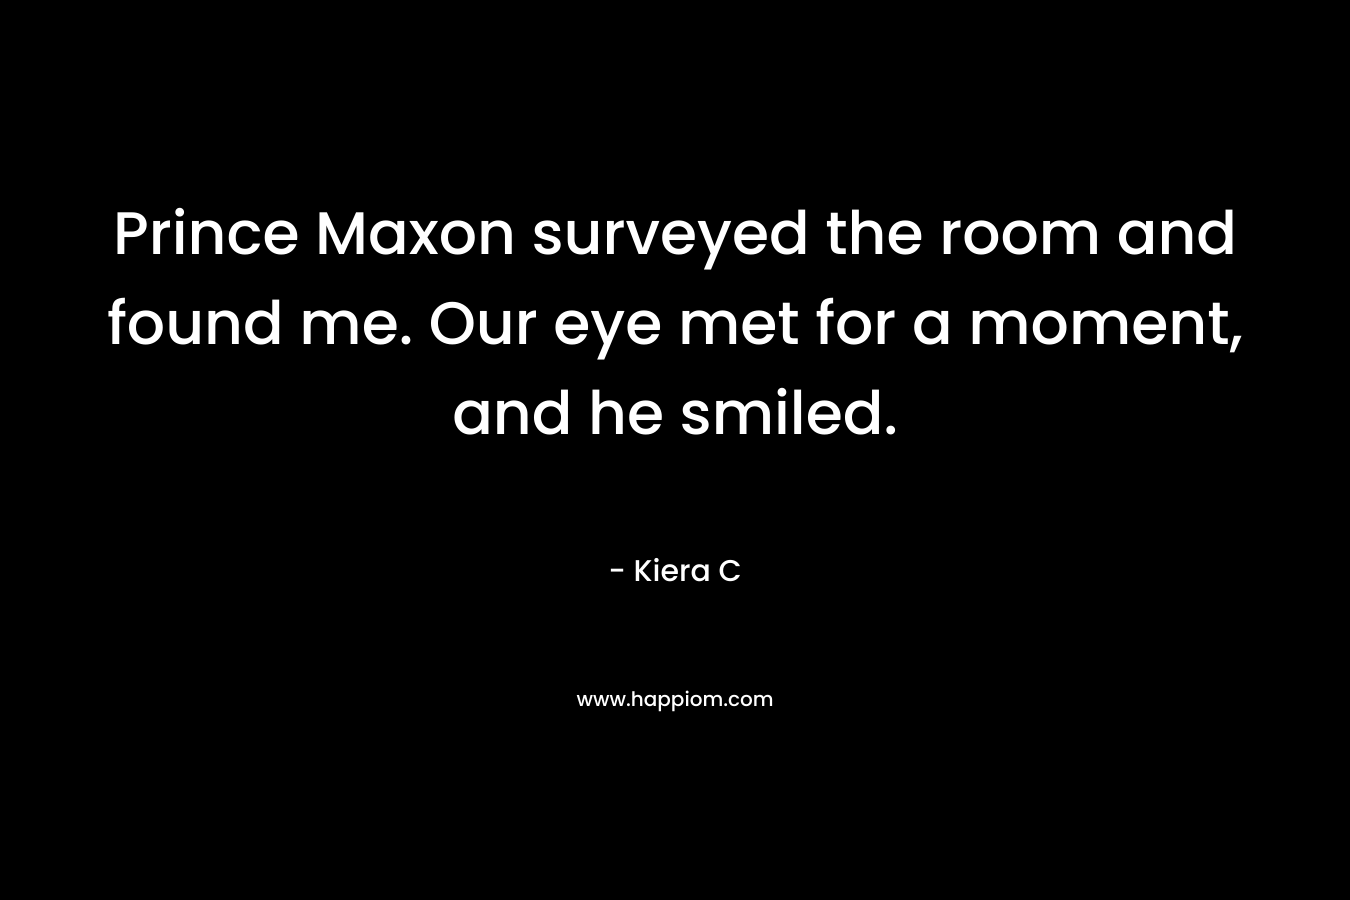 Prince Maxon surveyed the room and found me. Our eye met for a moment, and he smiled. – Kiera C